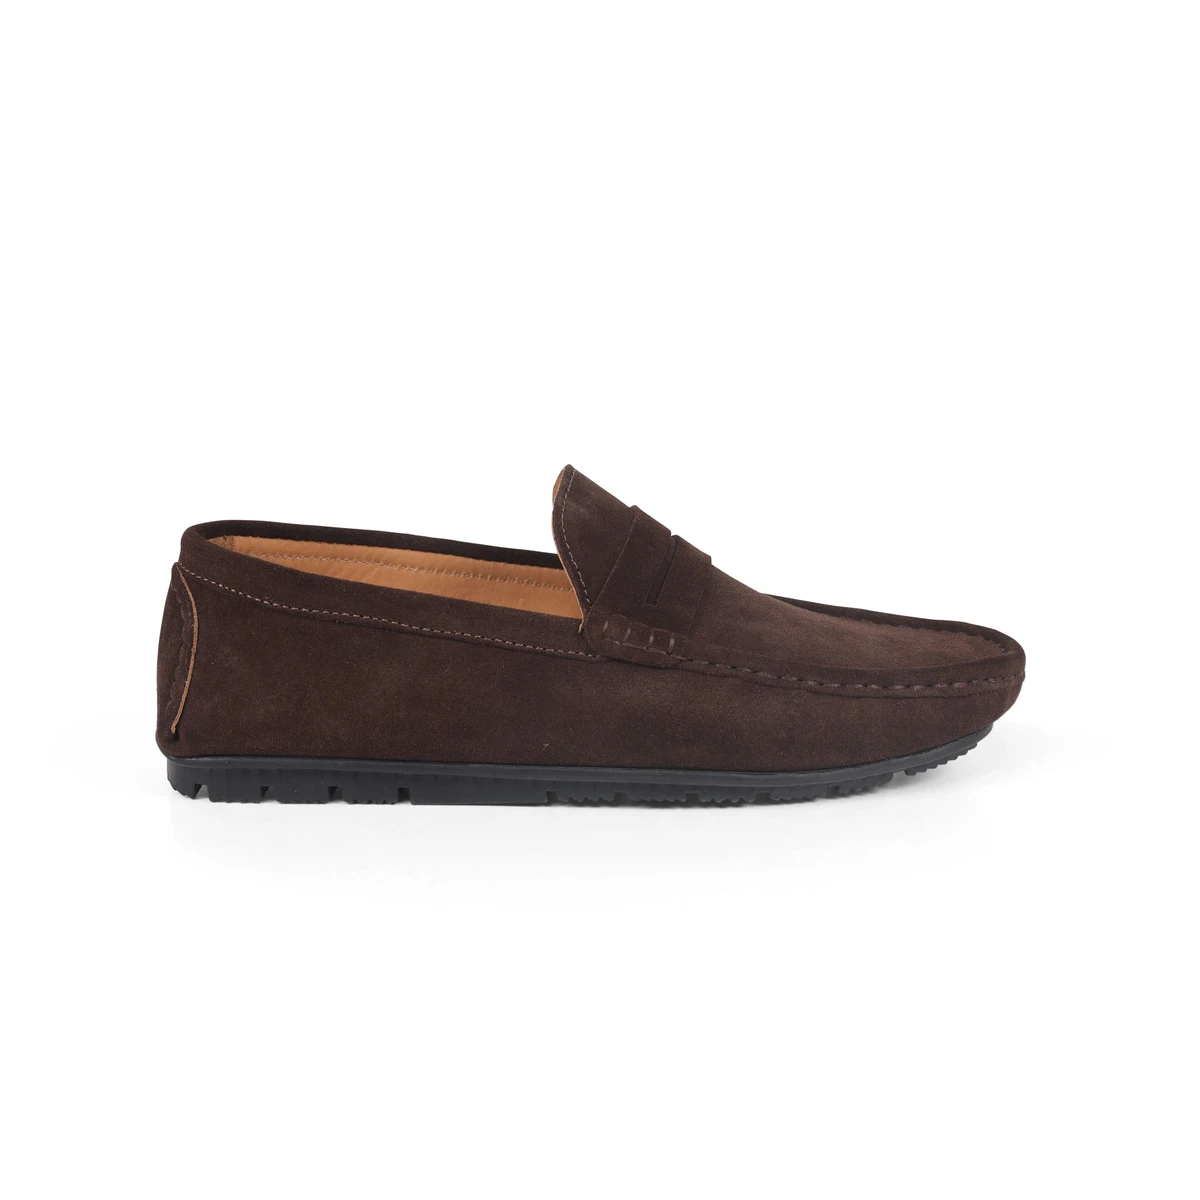 ANON Suede Leather Loafer Man’s L103